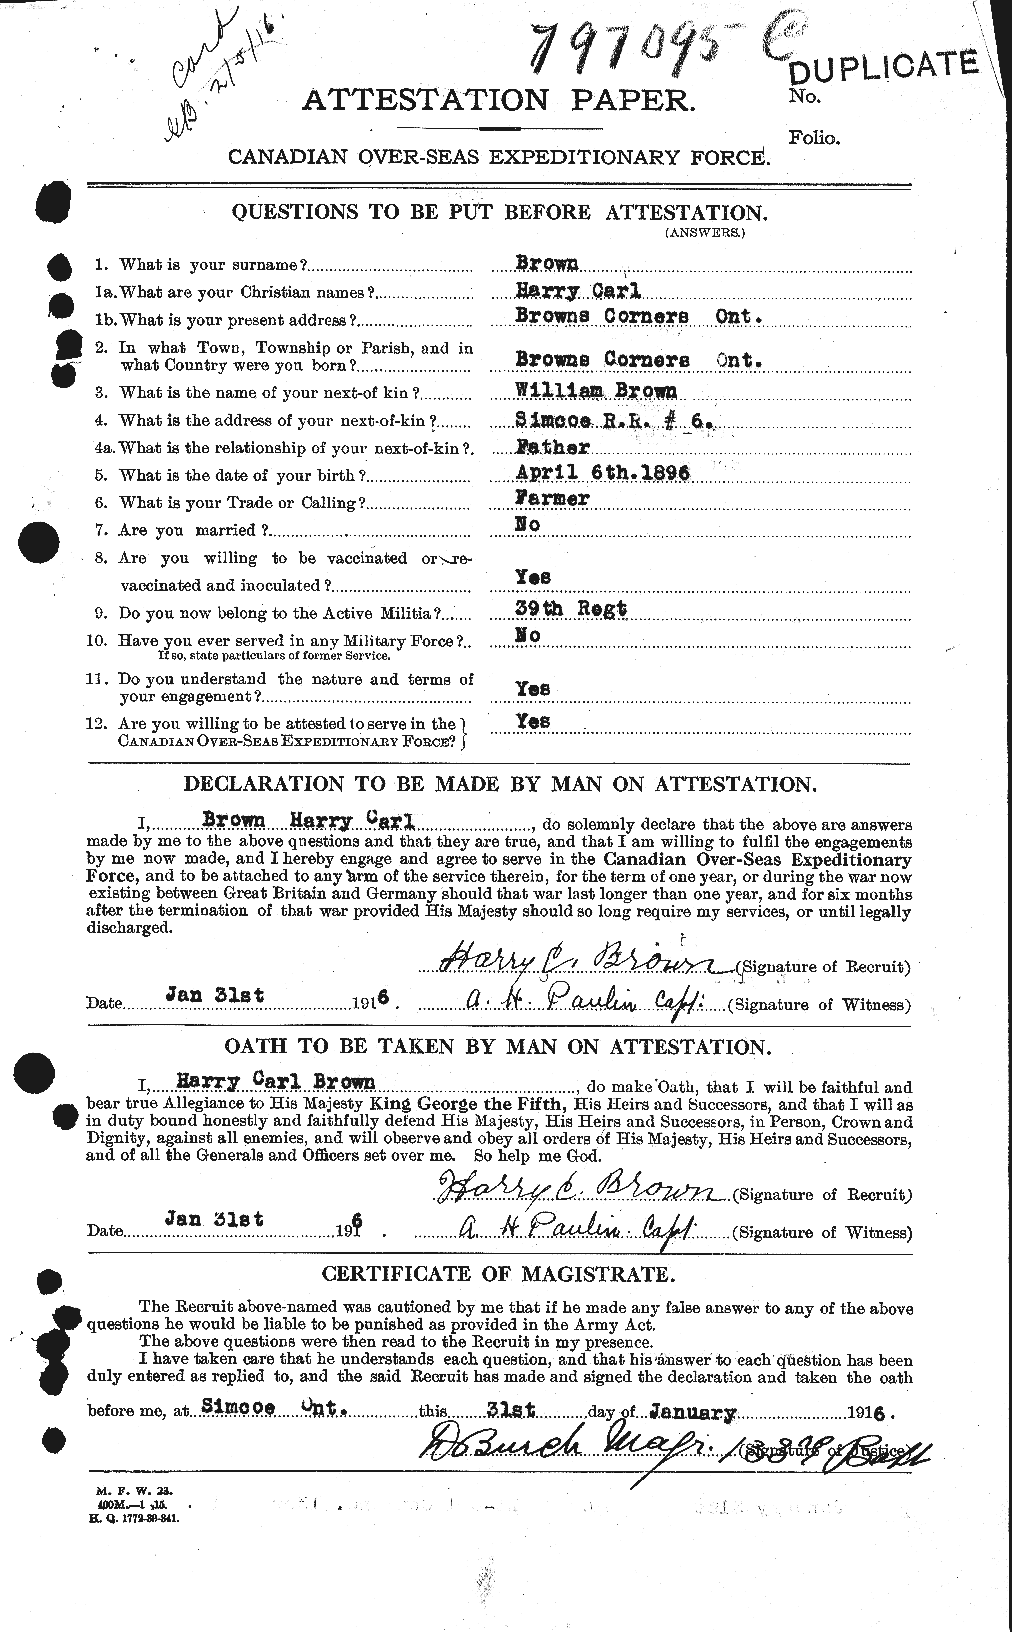 Personnel Records of the First World War - CEF 265445a